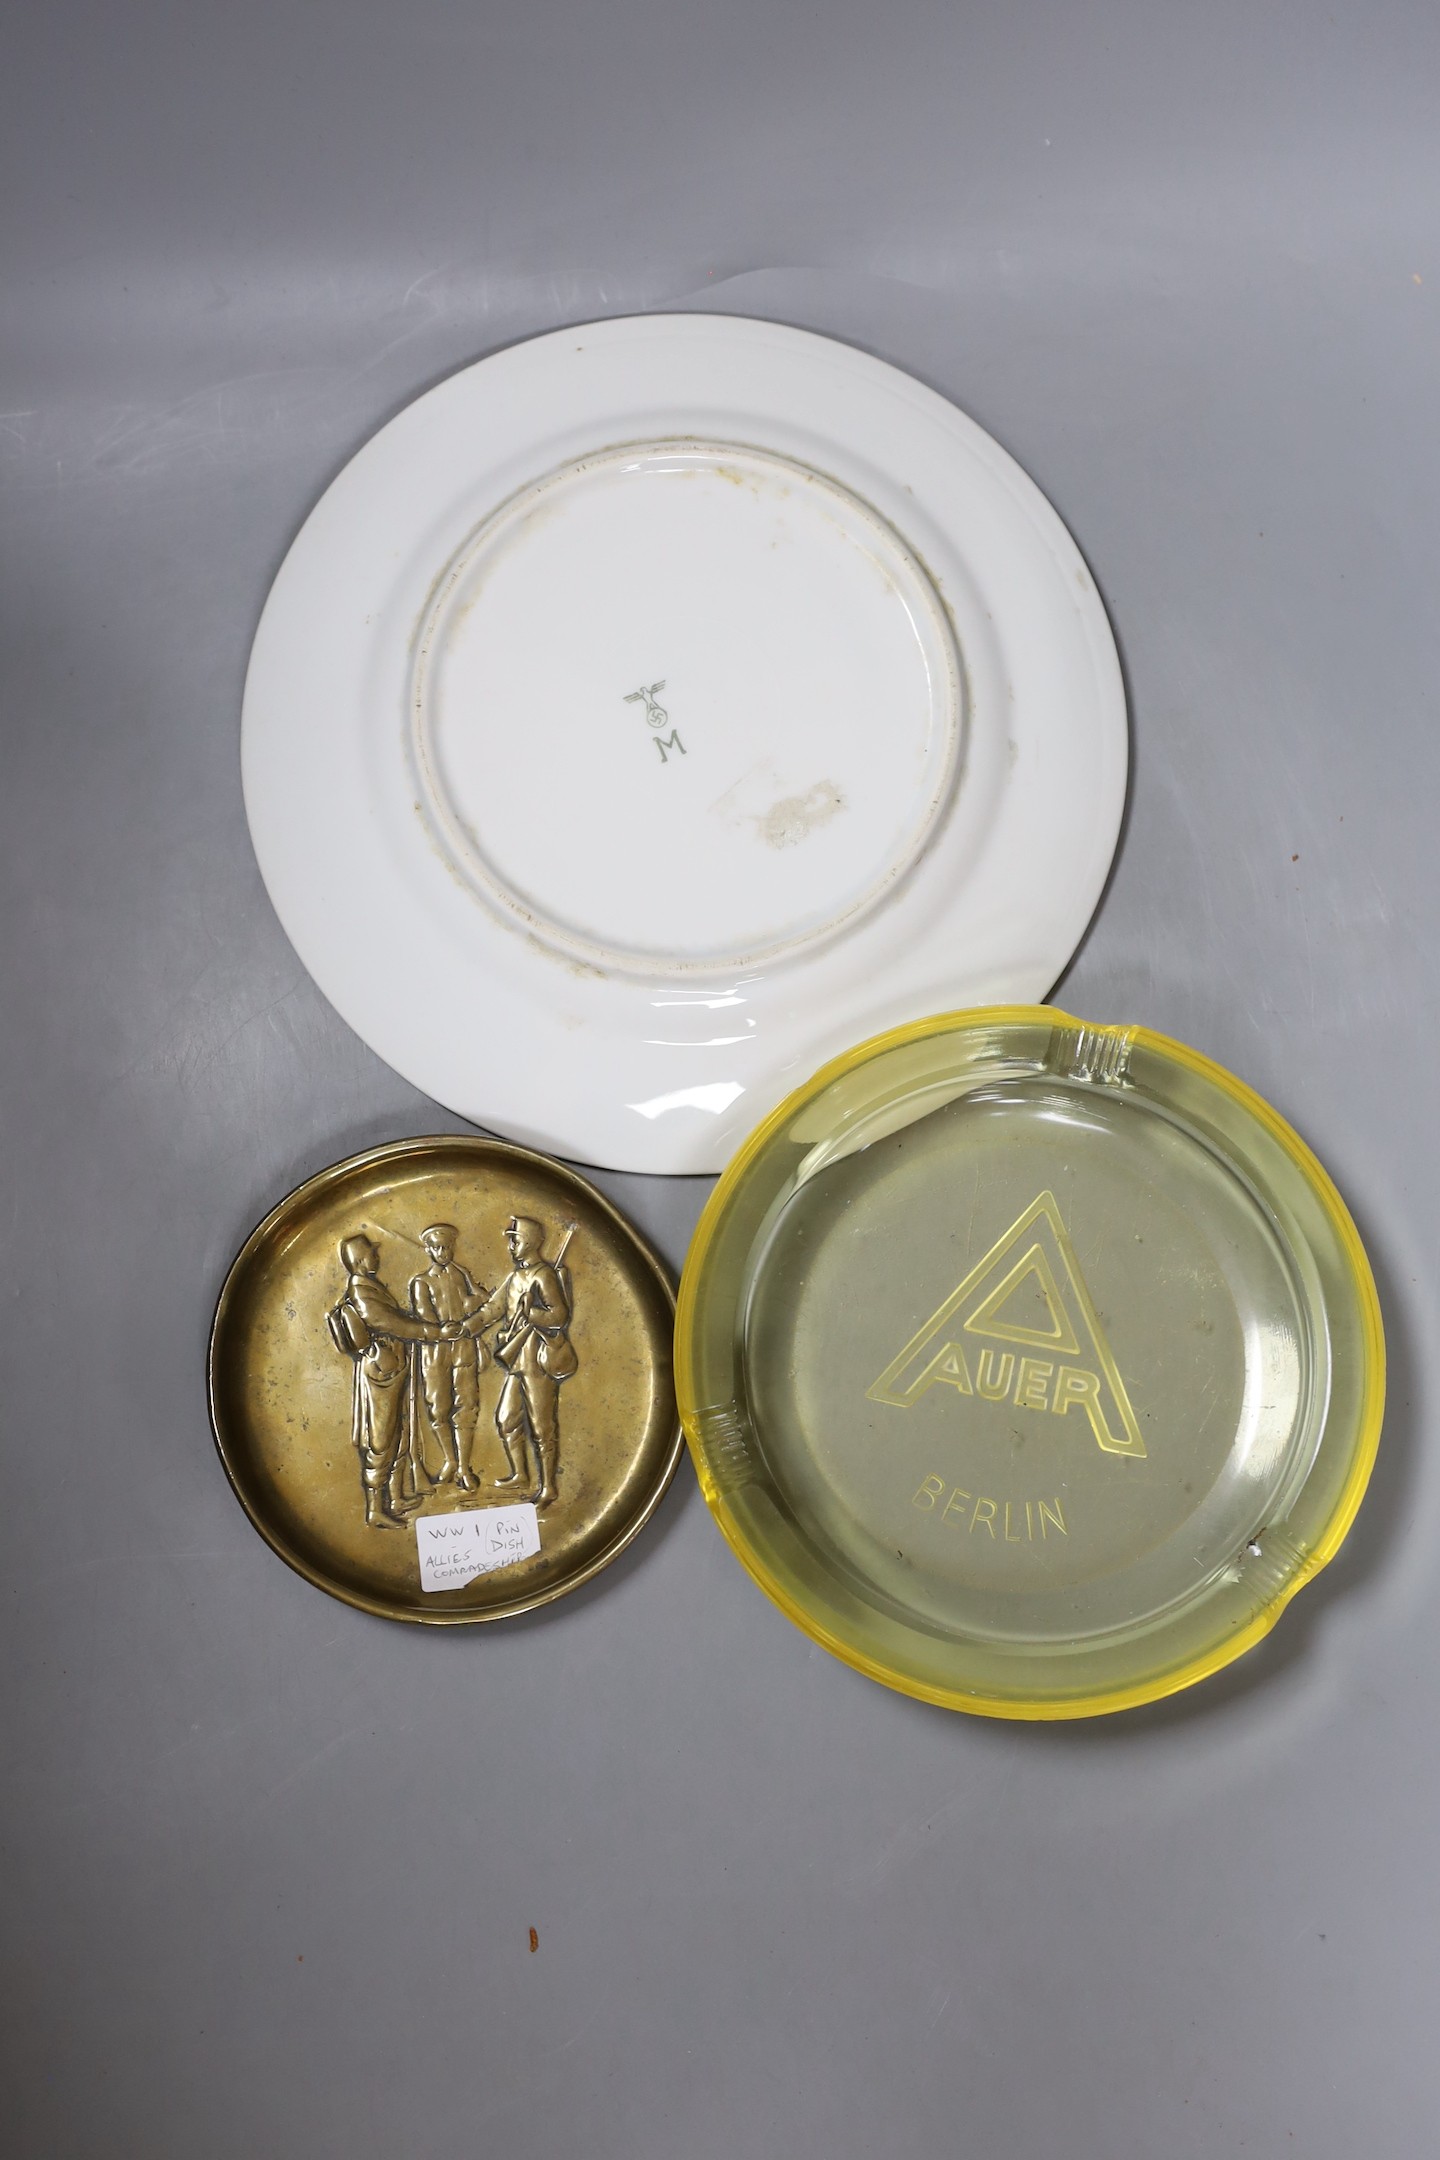 A WWII German Mess Hall porcelain plate, an Auer Berlin yellow glass ash tray and a WWI trench art ash tray, largest 24cm diameter